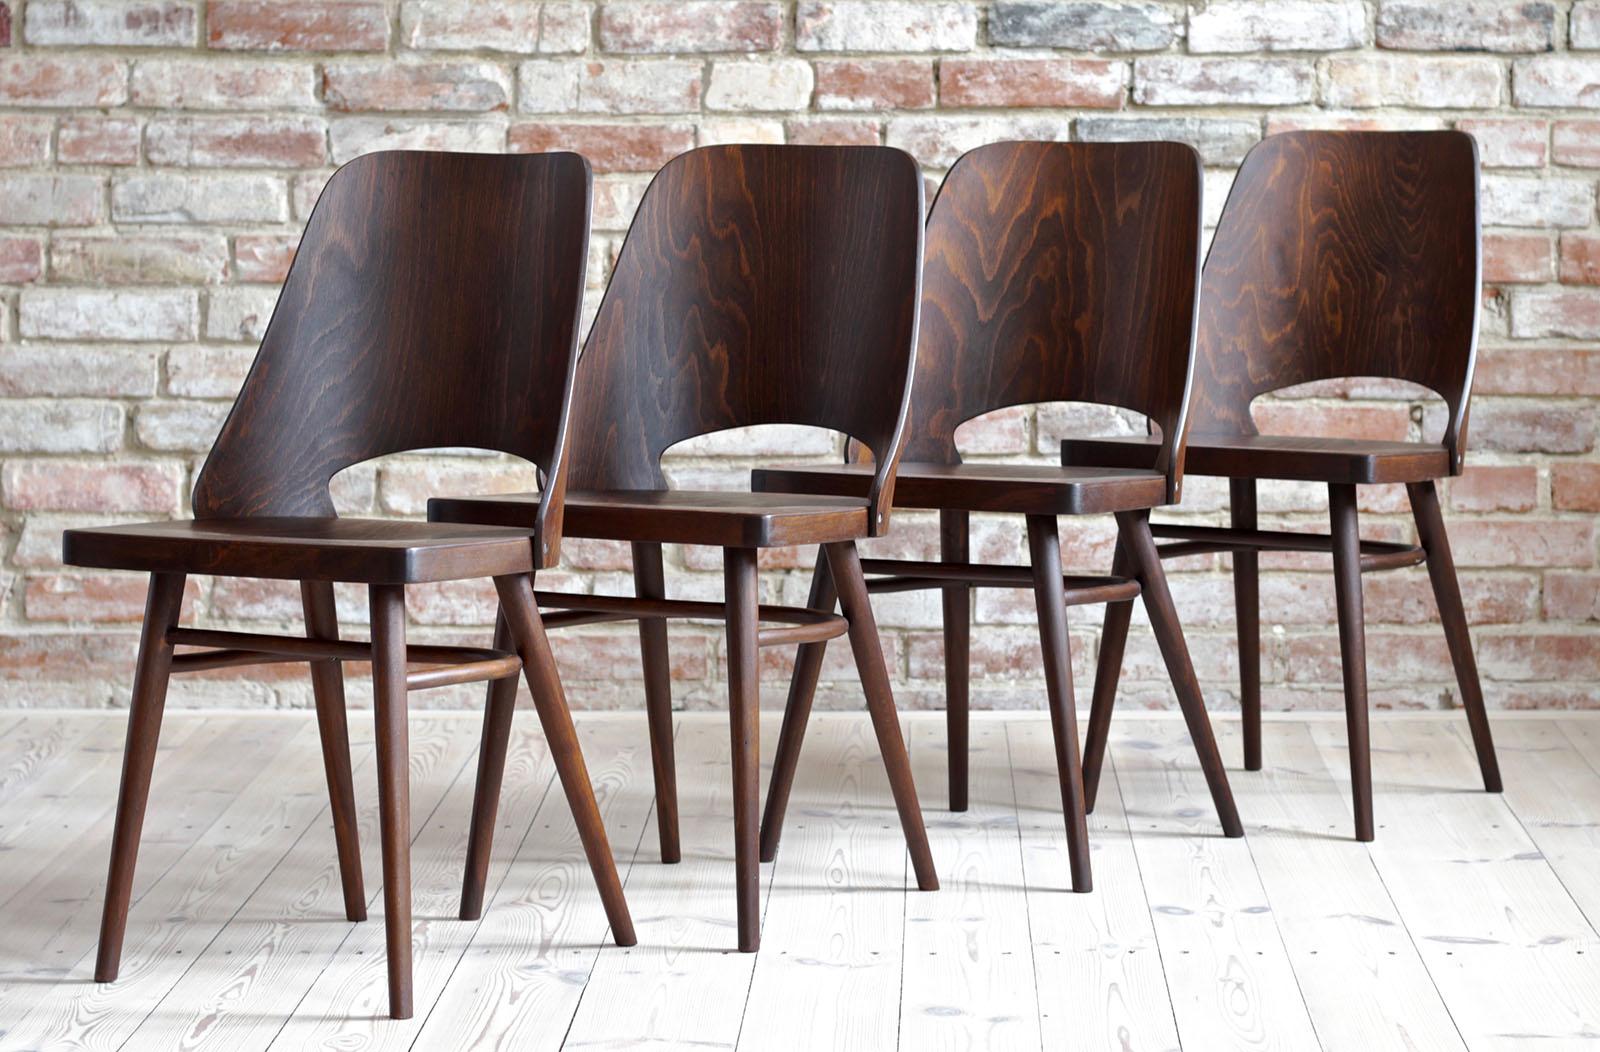 Set of 4 chairs designed by Oswald Haerdtl. The chairs are after complete renovation, have been cleaned, polished and refinished in natural oil which gave them a warm and natural look. They are veneered with beech wood. Beautiful set for a coffee